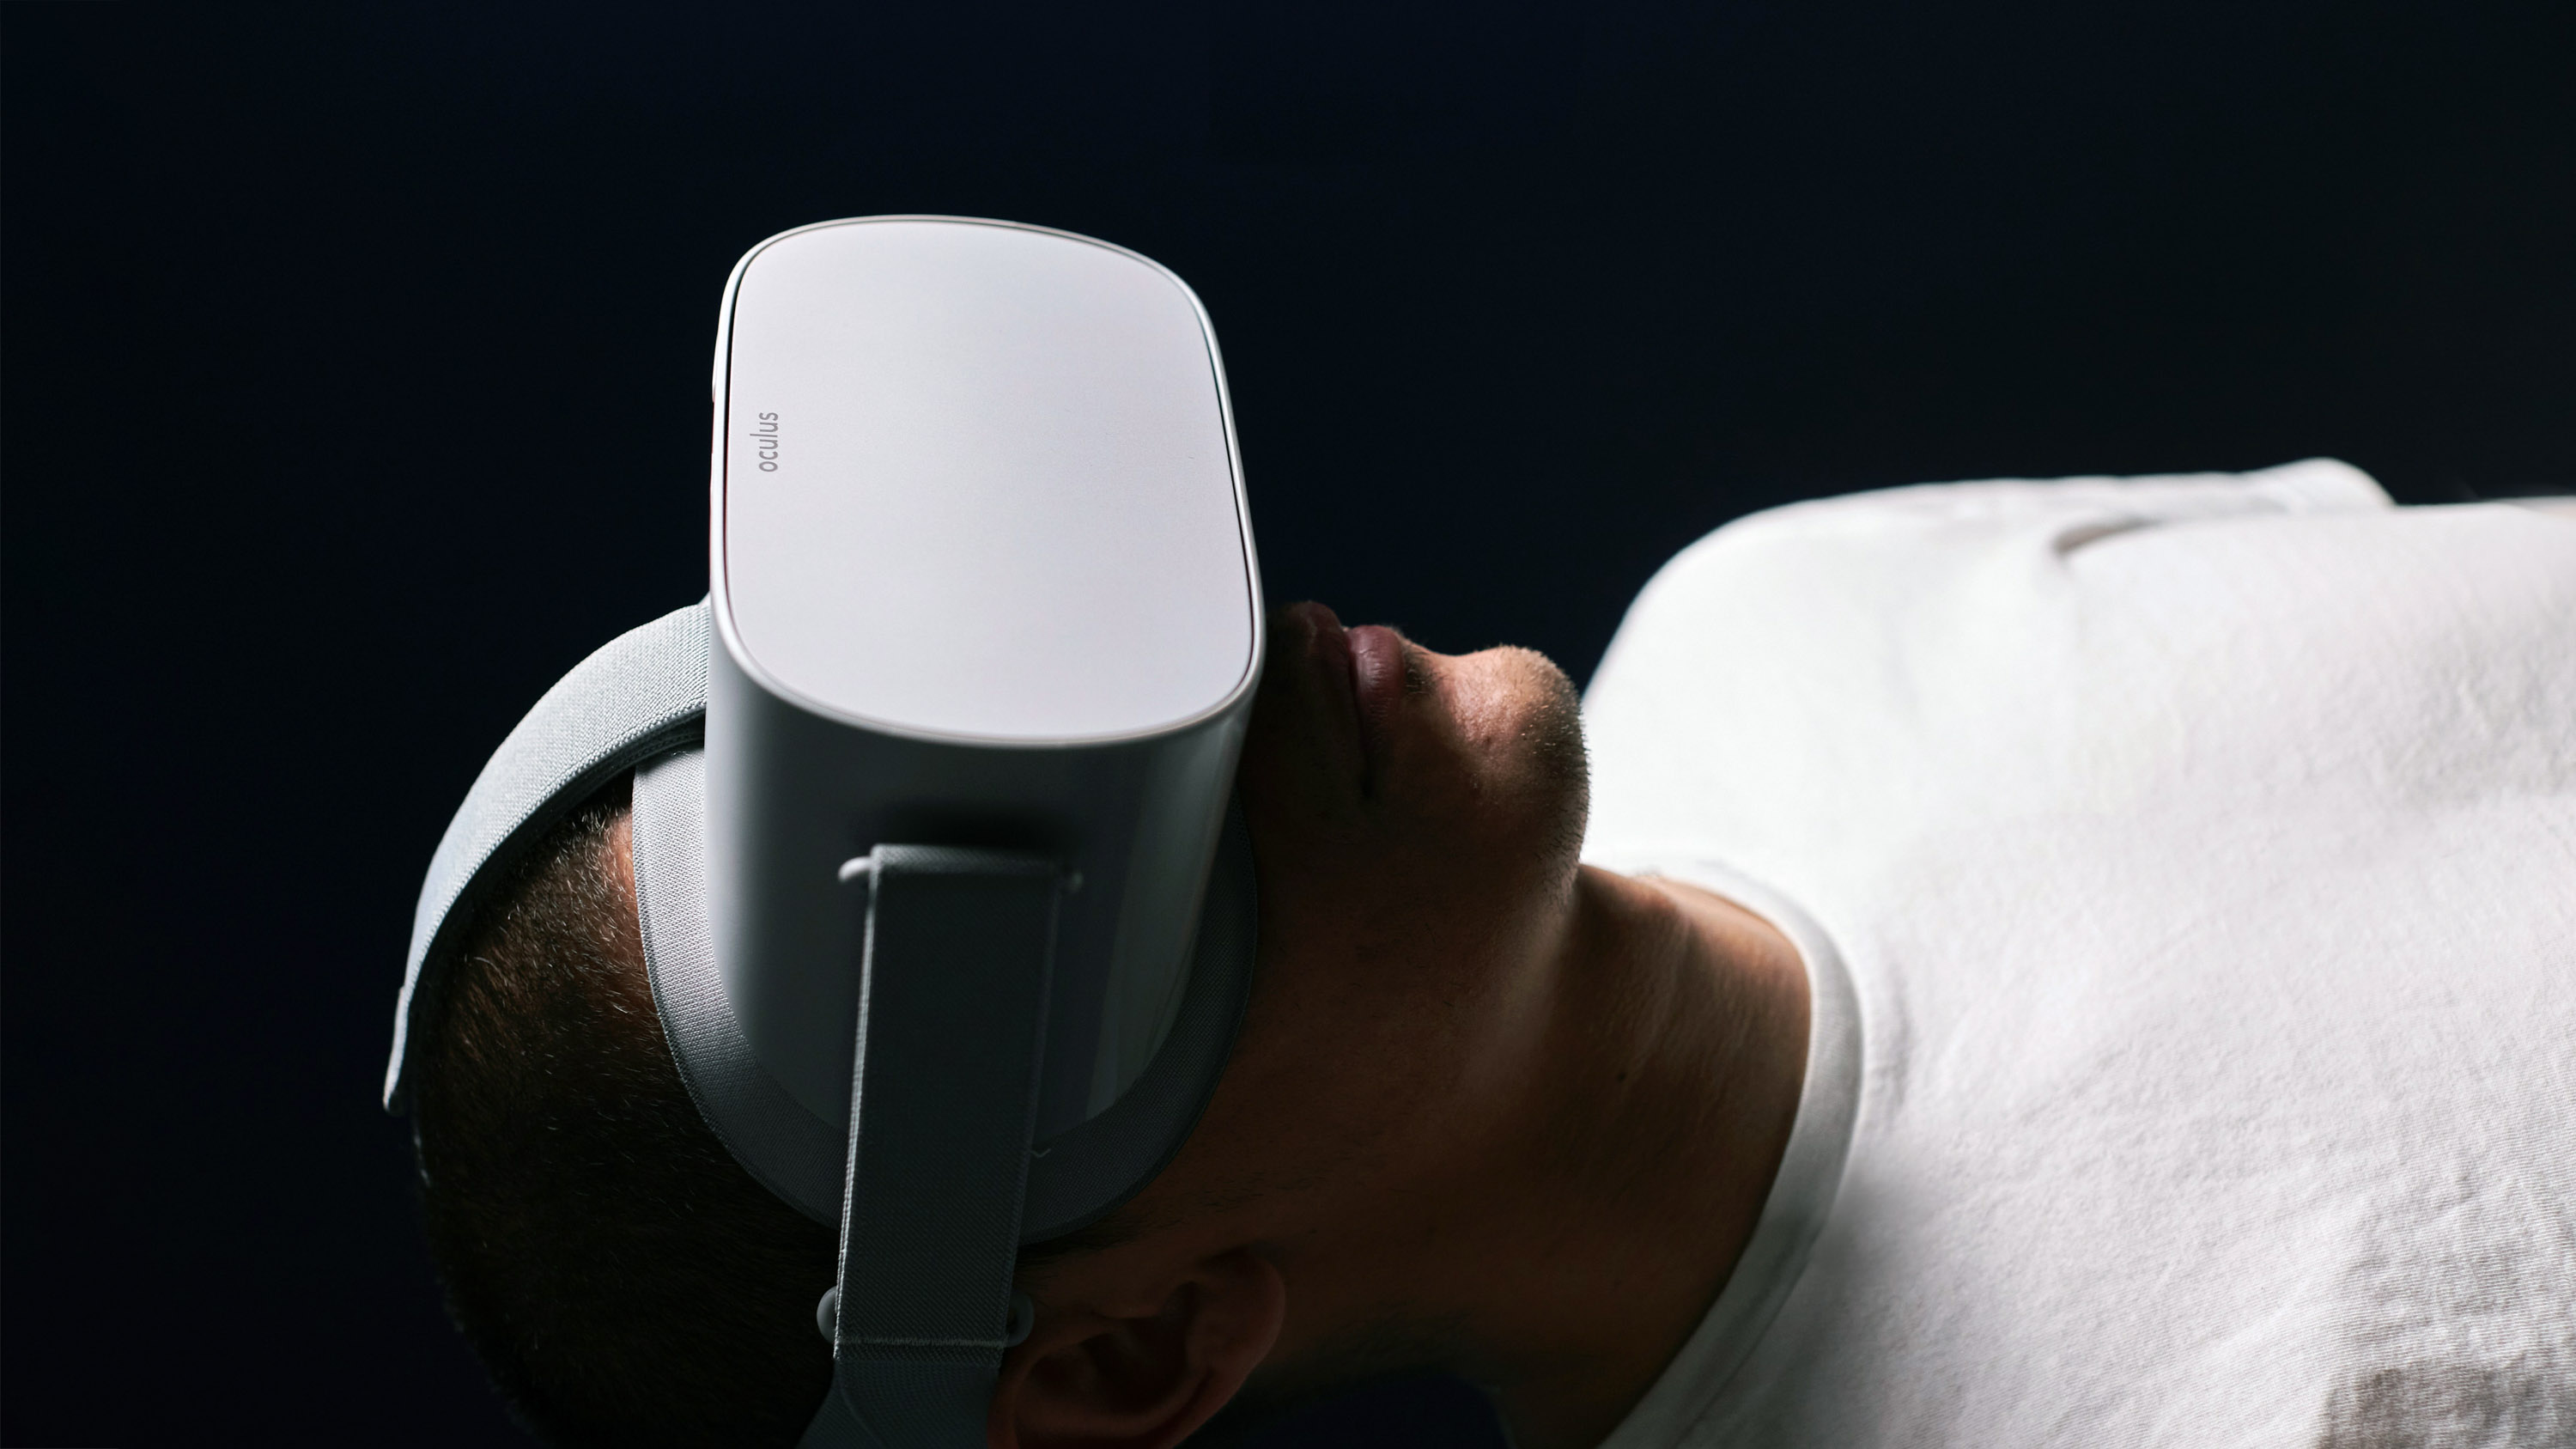 Patients immersed in virtual reality during surgery may need less anesthetic